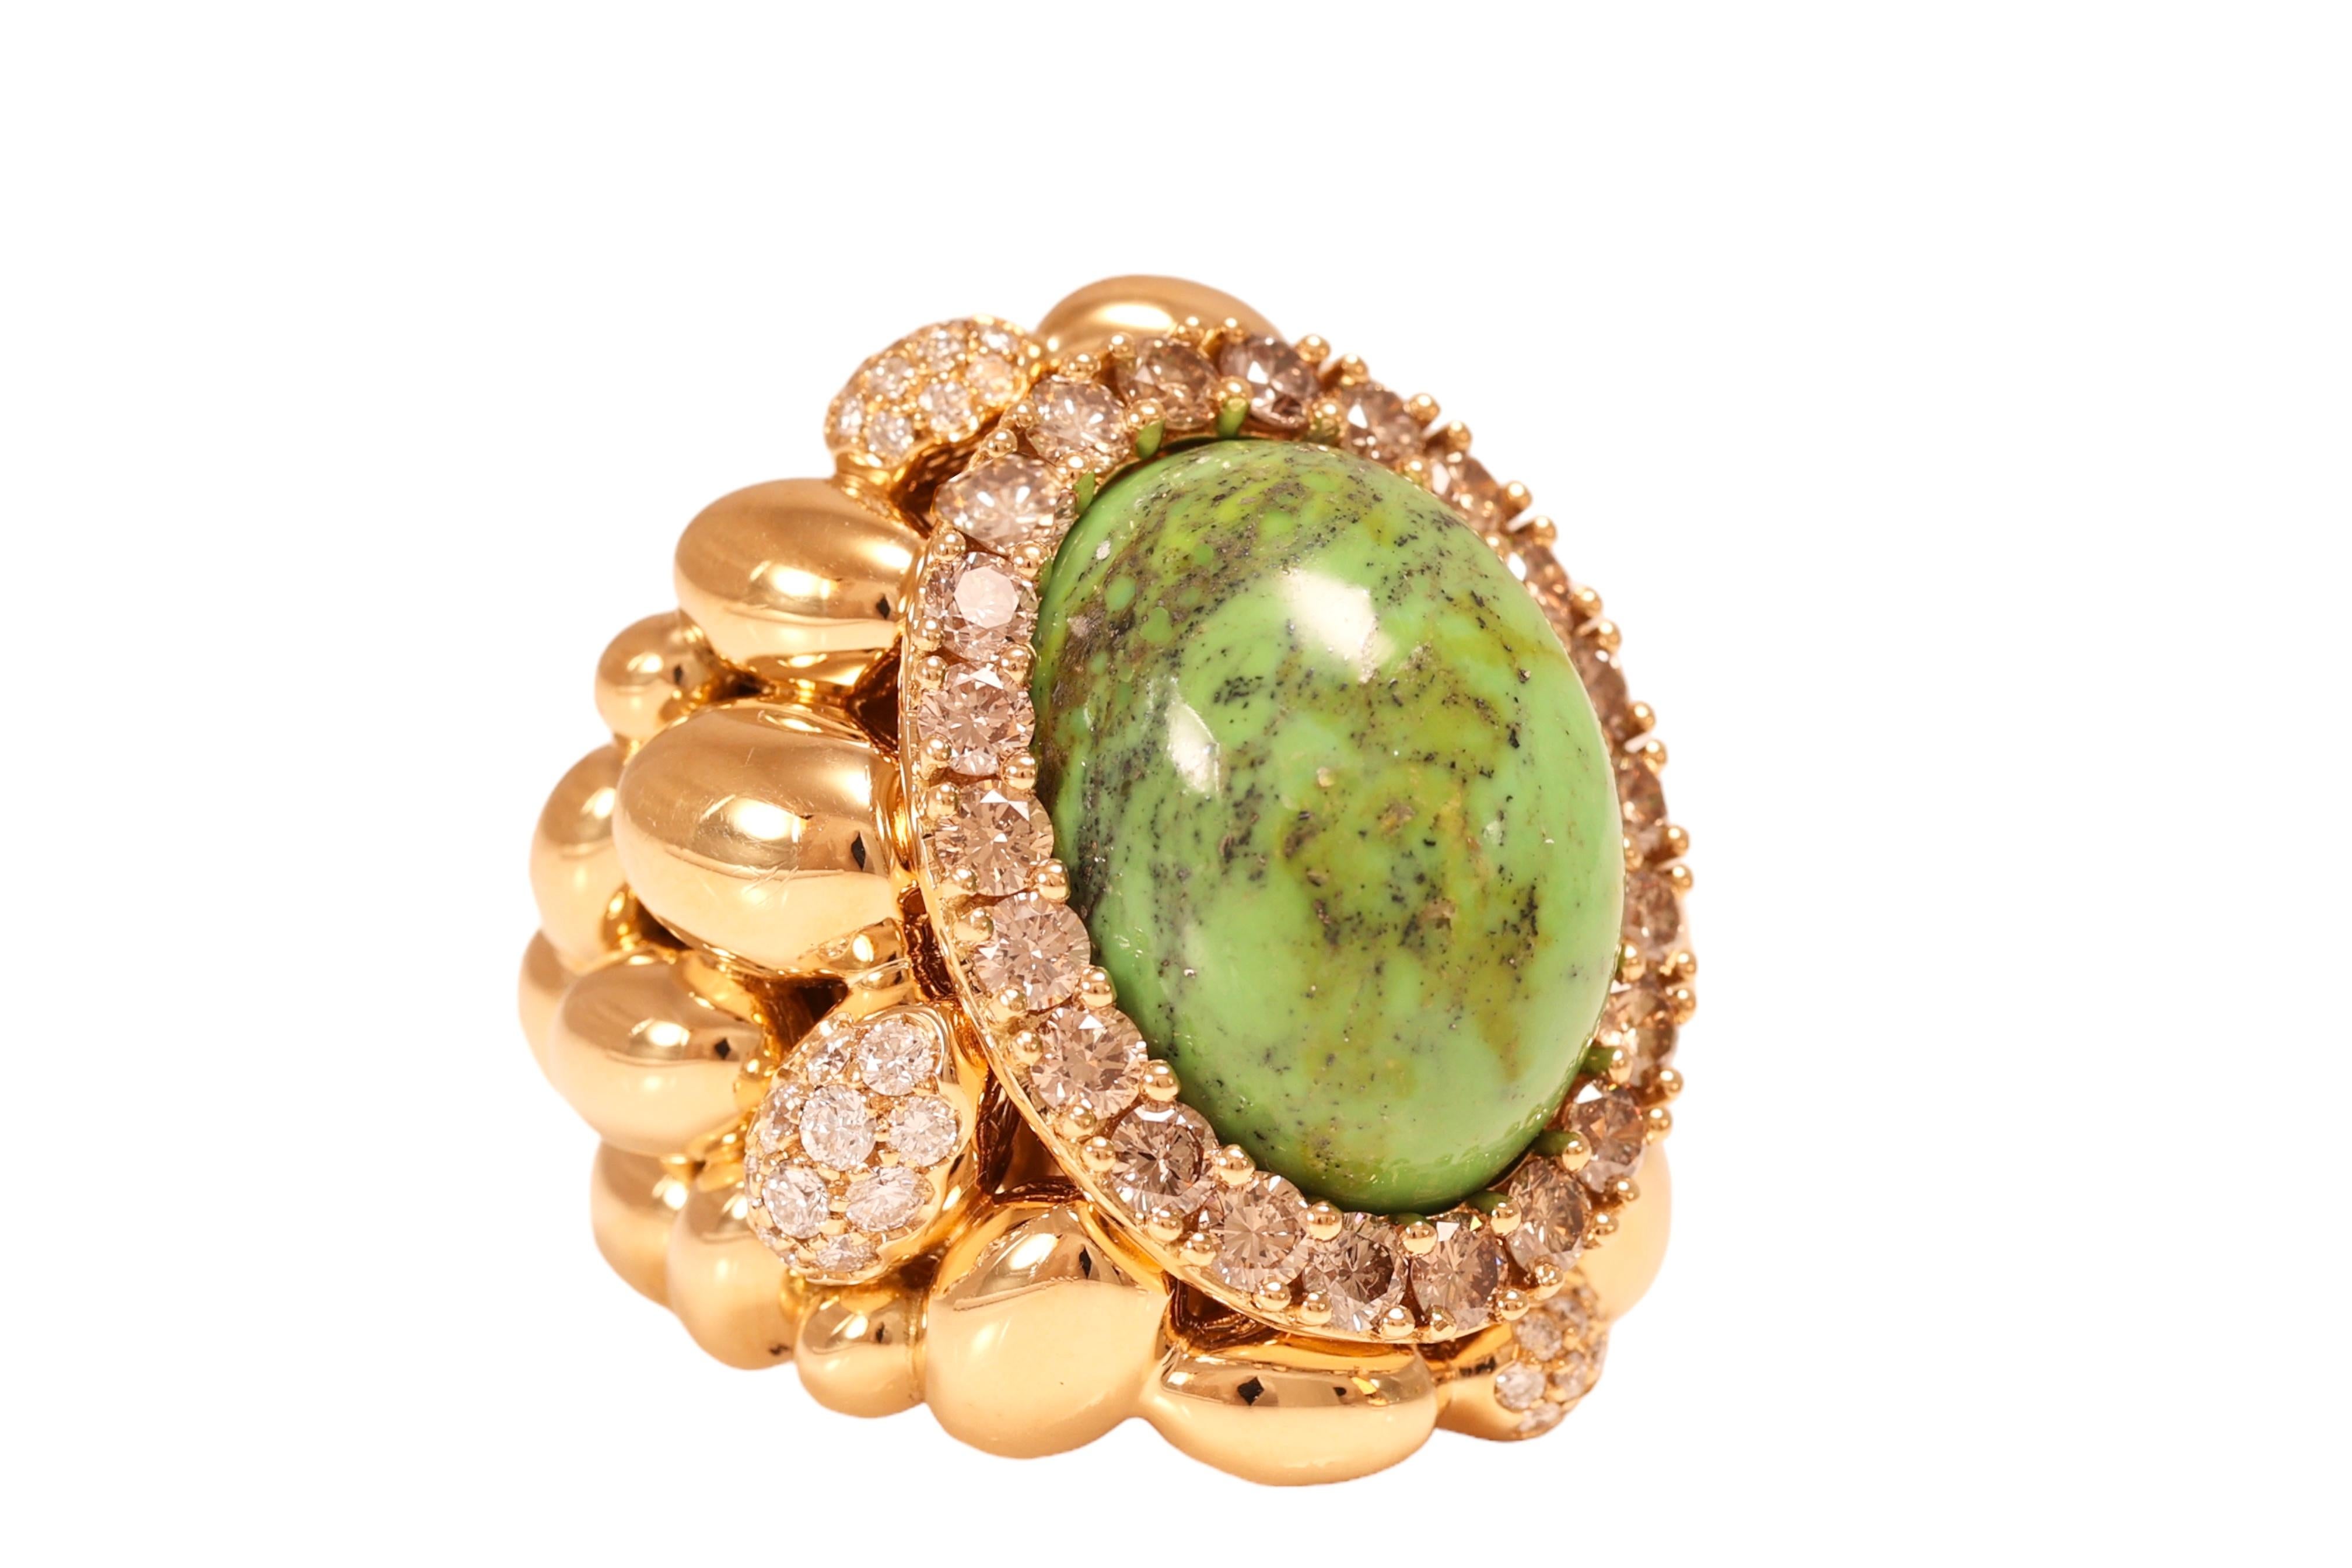 Fabulous Mattioli Ring with Big green stone and diamonds With Clusters of Polished Yellow Gold 

Diamonds: 62 Brilliant cut diamonds together 3.2ct 

Material: 18kt yellow gold

Ring size: 55.7 EU / 7.5 US ( can be resized for free)

Total weight: